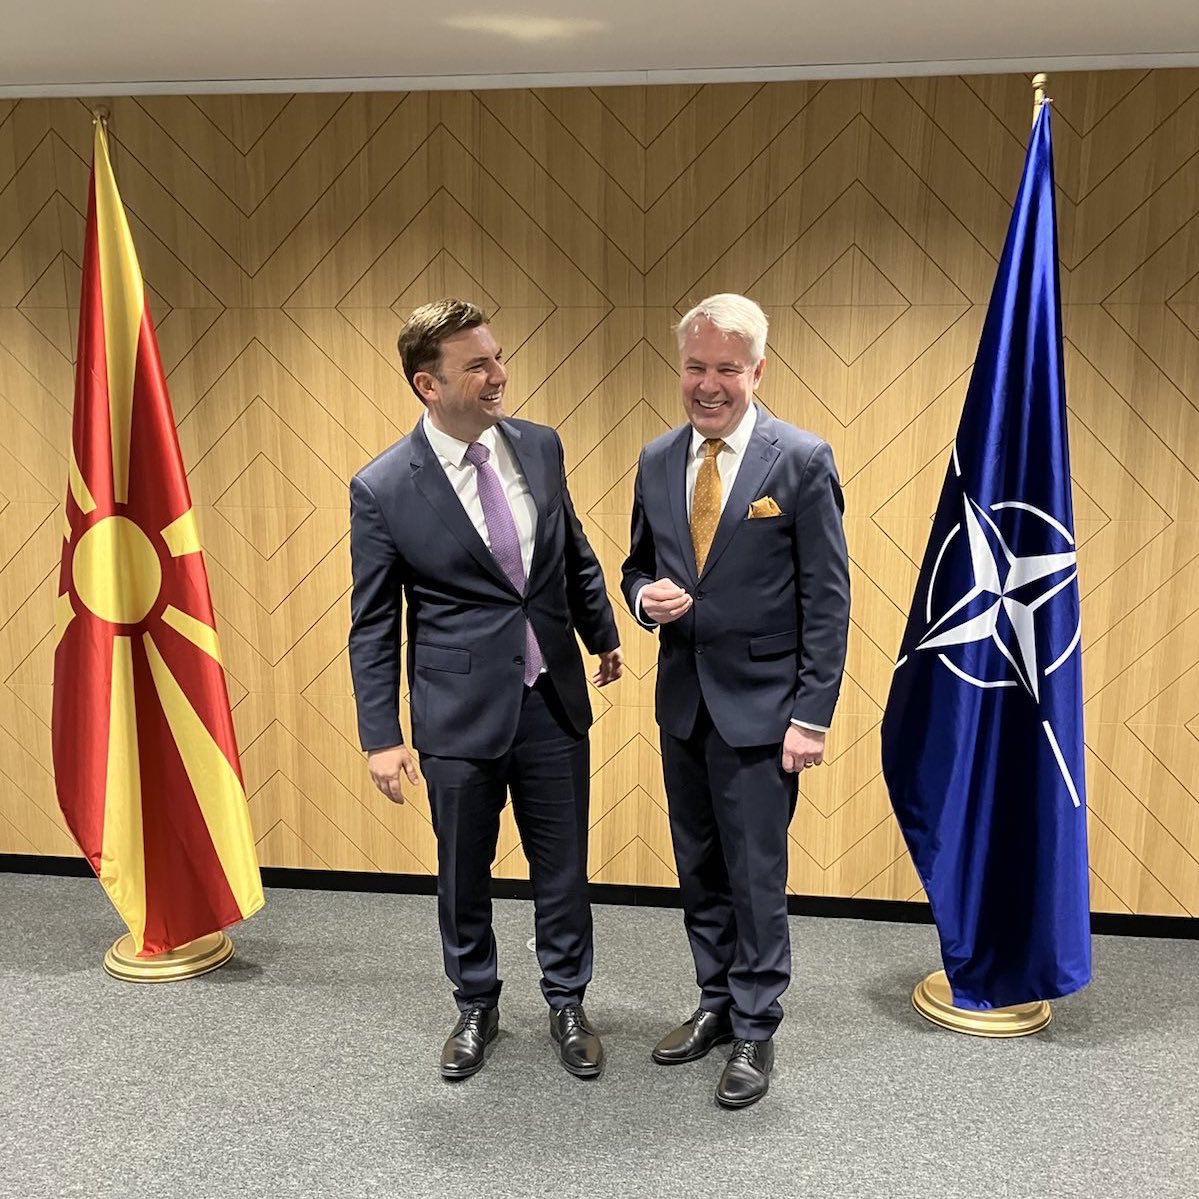 FM @Haavisto: Excellent discussion with @OSCECIO @bujar_o 🇲🇰 on role of the @OSCE in European security and our OSCE Troika cooperation. Support for Ukraine is our long-standing priority. Finland is preparing for the Finnish OSCE Chairpersonship in 2025.  #ItsAboutPeople